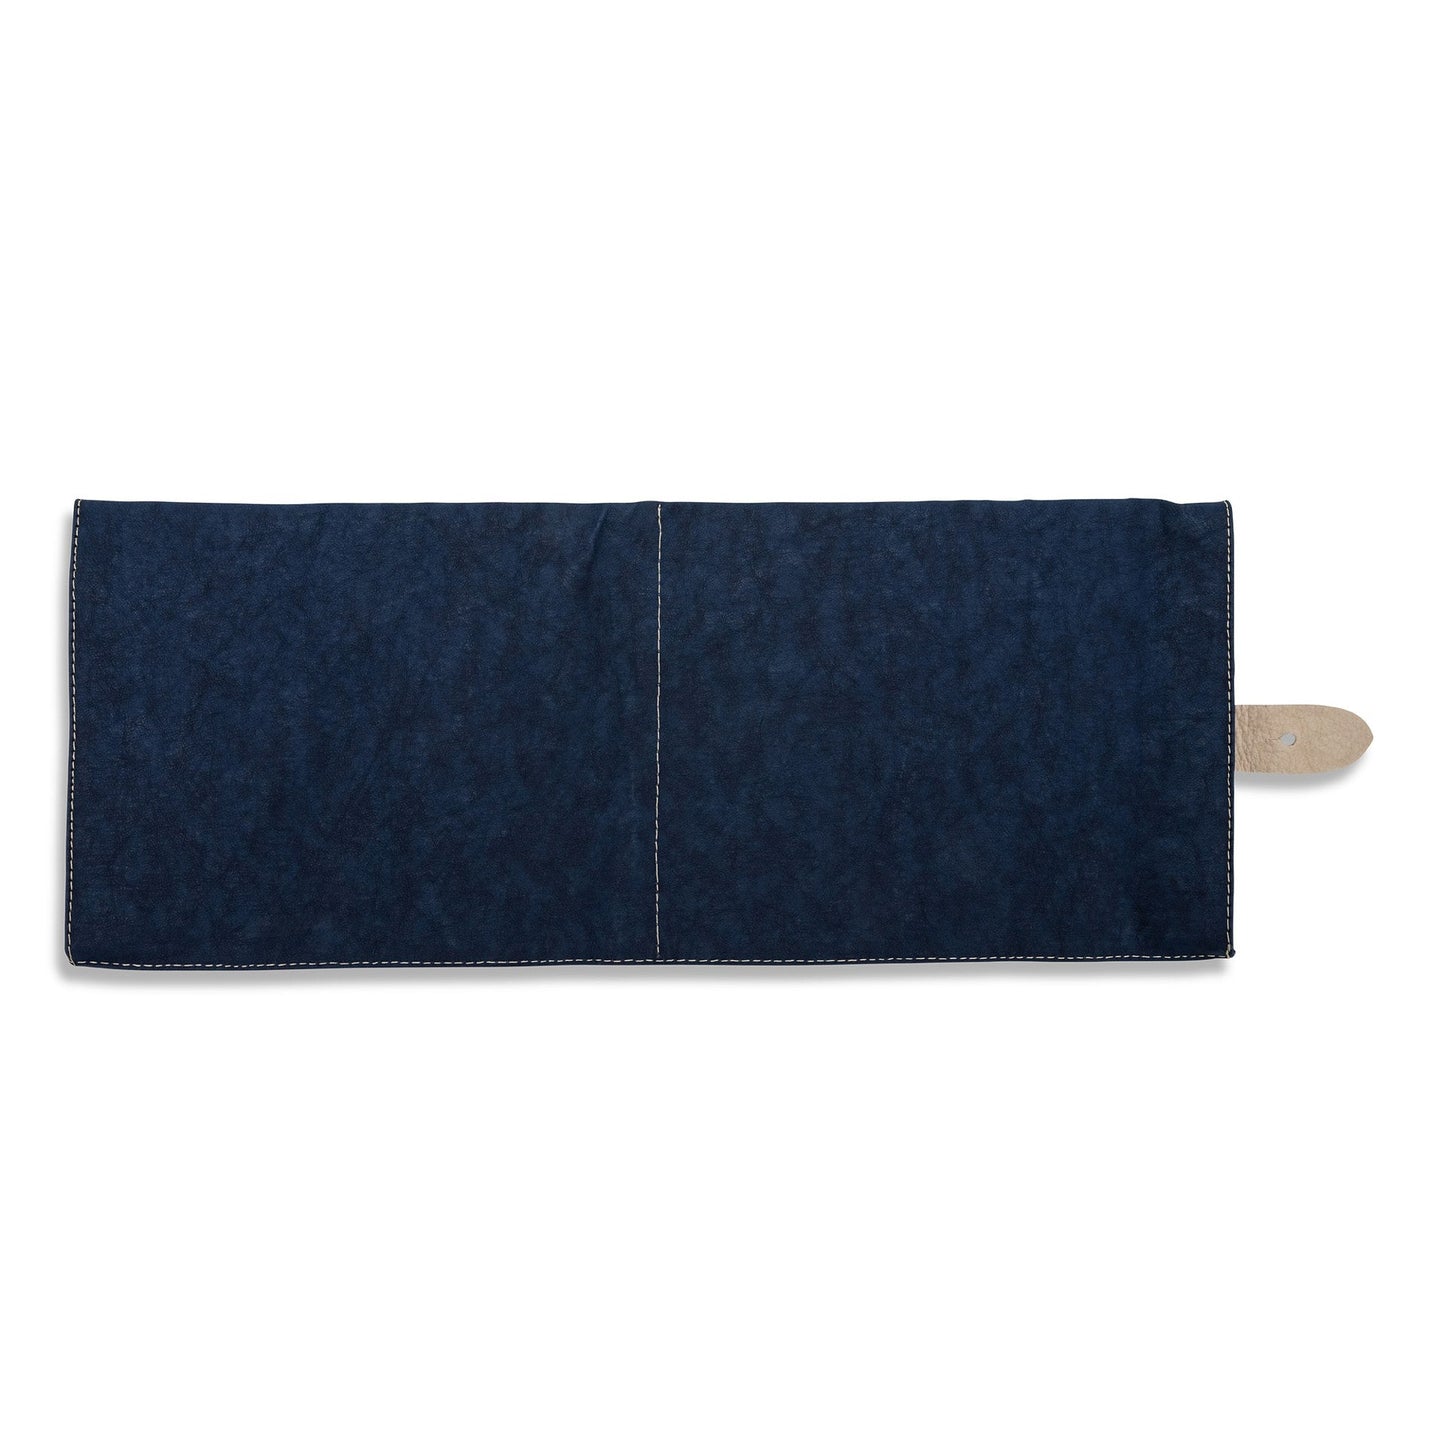 A navy washable paper wine cooler lies open and is photographed from the back.